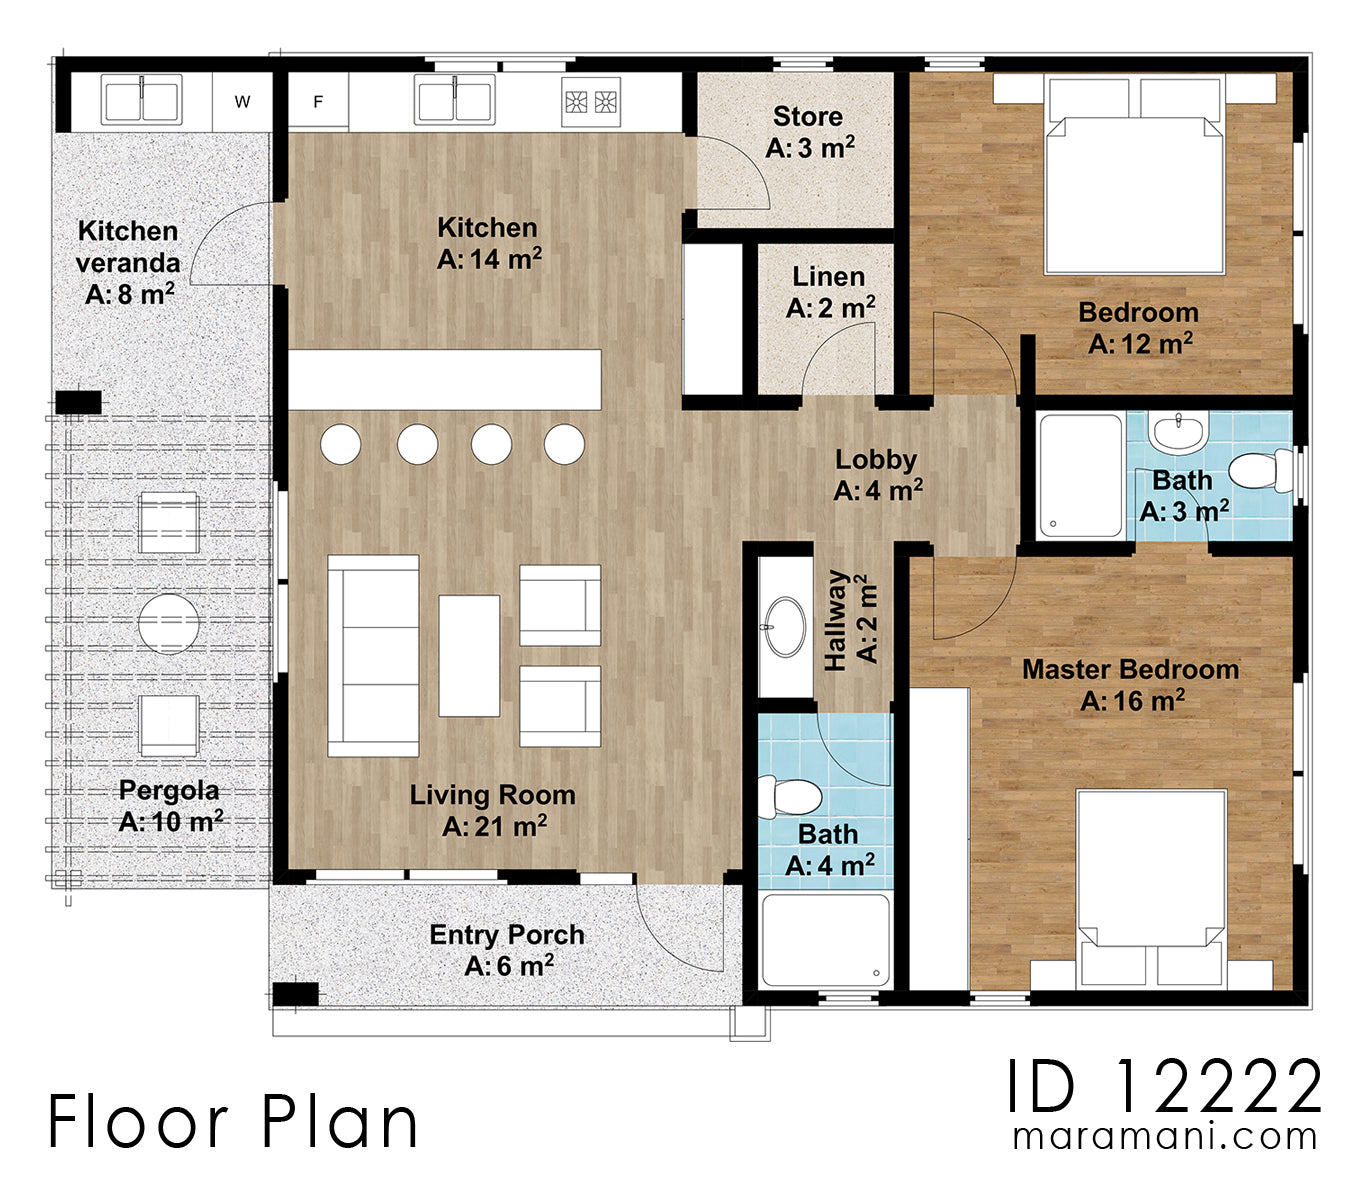 Small 2 Bedroom House Plan - ID 12222